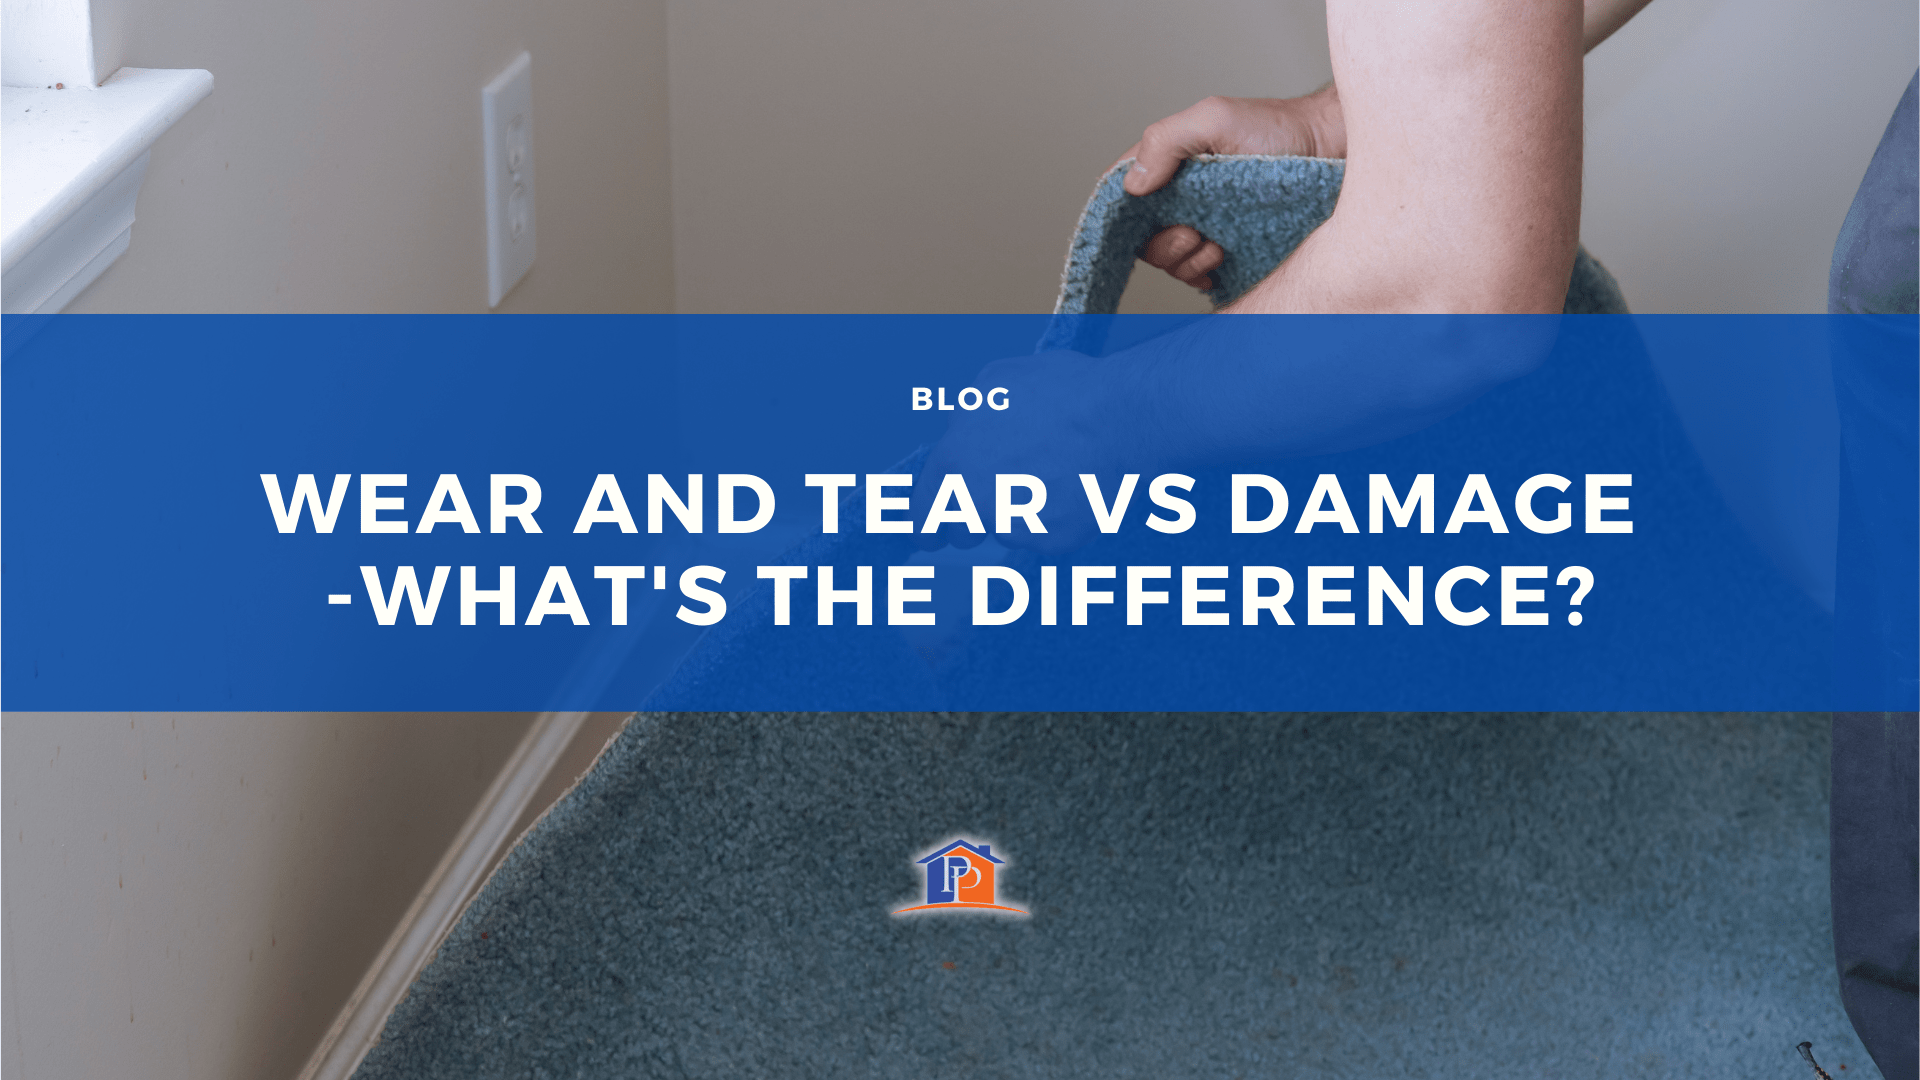 Wear and Tear VS Damage -What's the difference?